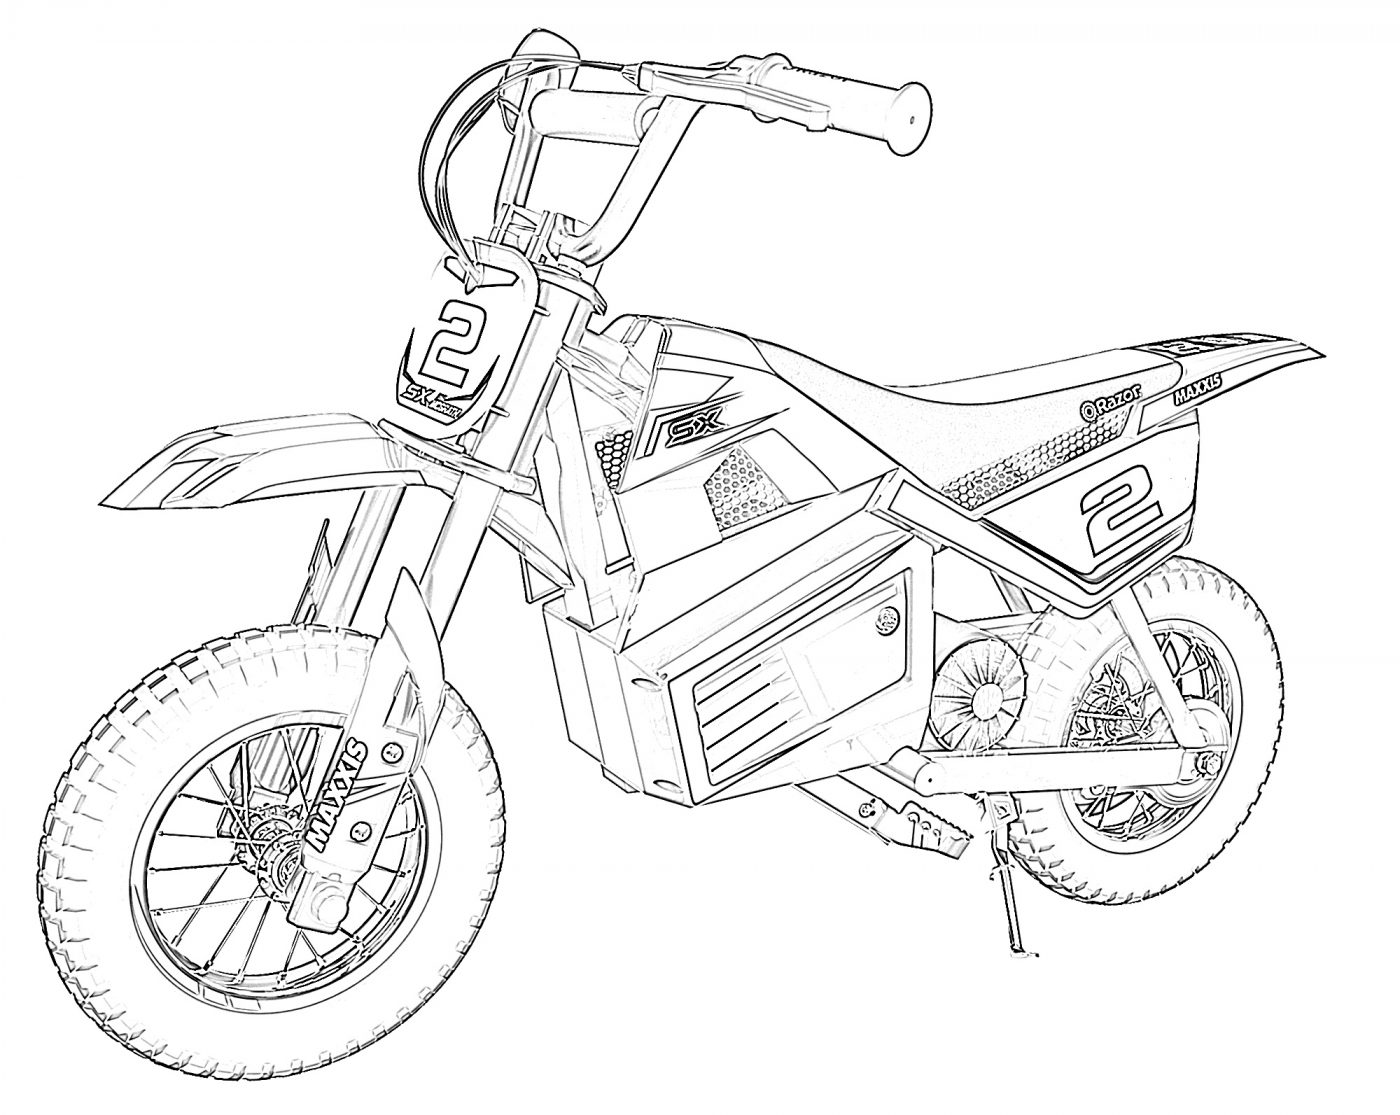 10 Free Dirt Bike Coloring Pages for Kids | Save, Print, & Enjoy!